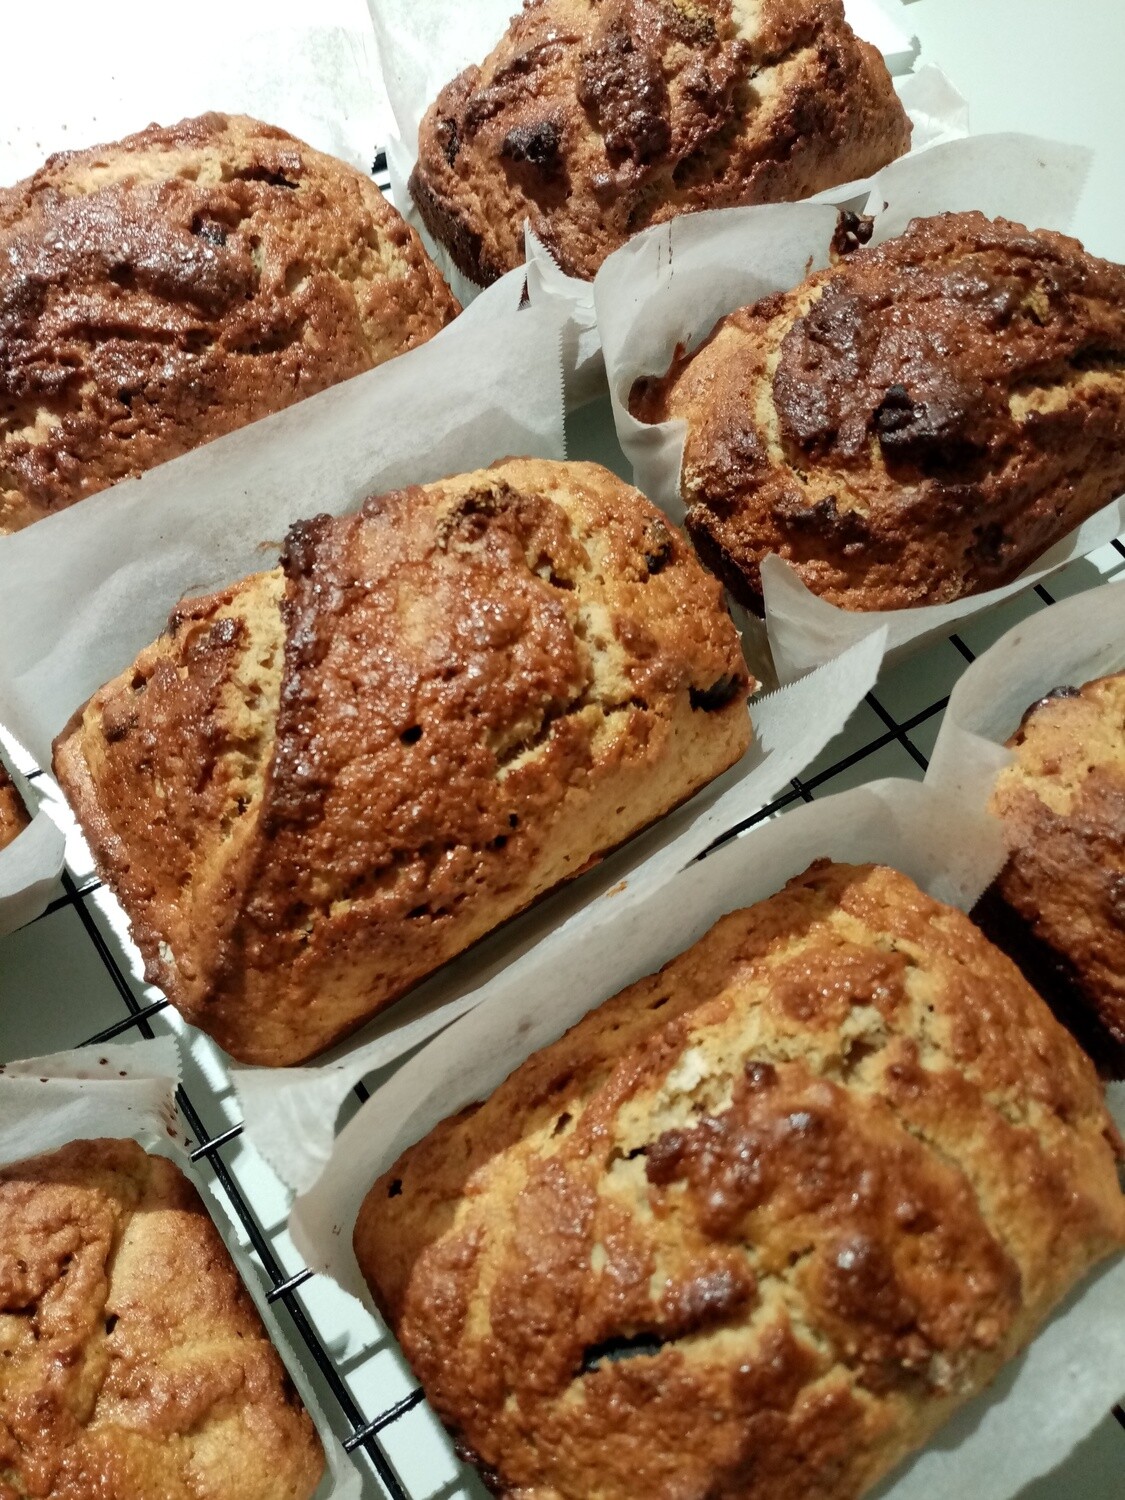 OVEN FRESH BANANA BREAD Wholemeal spelt, almond meal, banana and date mini loaf.